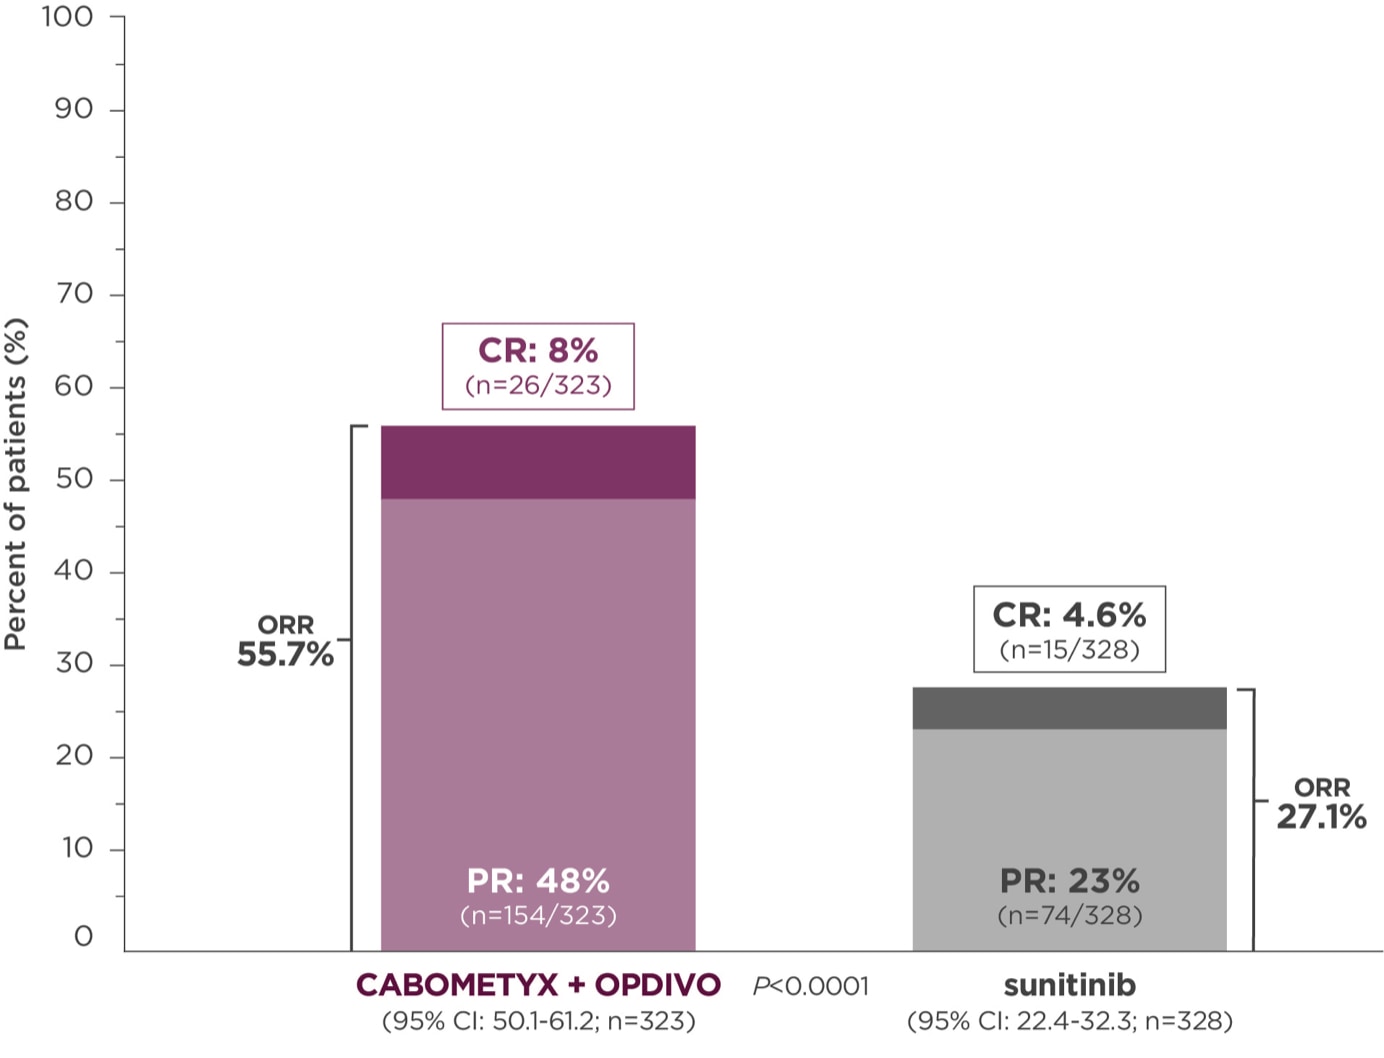 data chart compares primary analysis ORR data for CABOMETYX + OPDIVO vs sunitinib